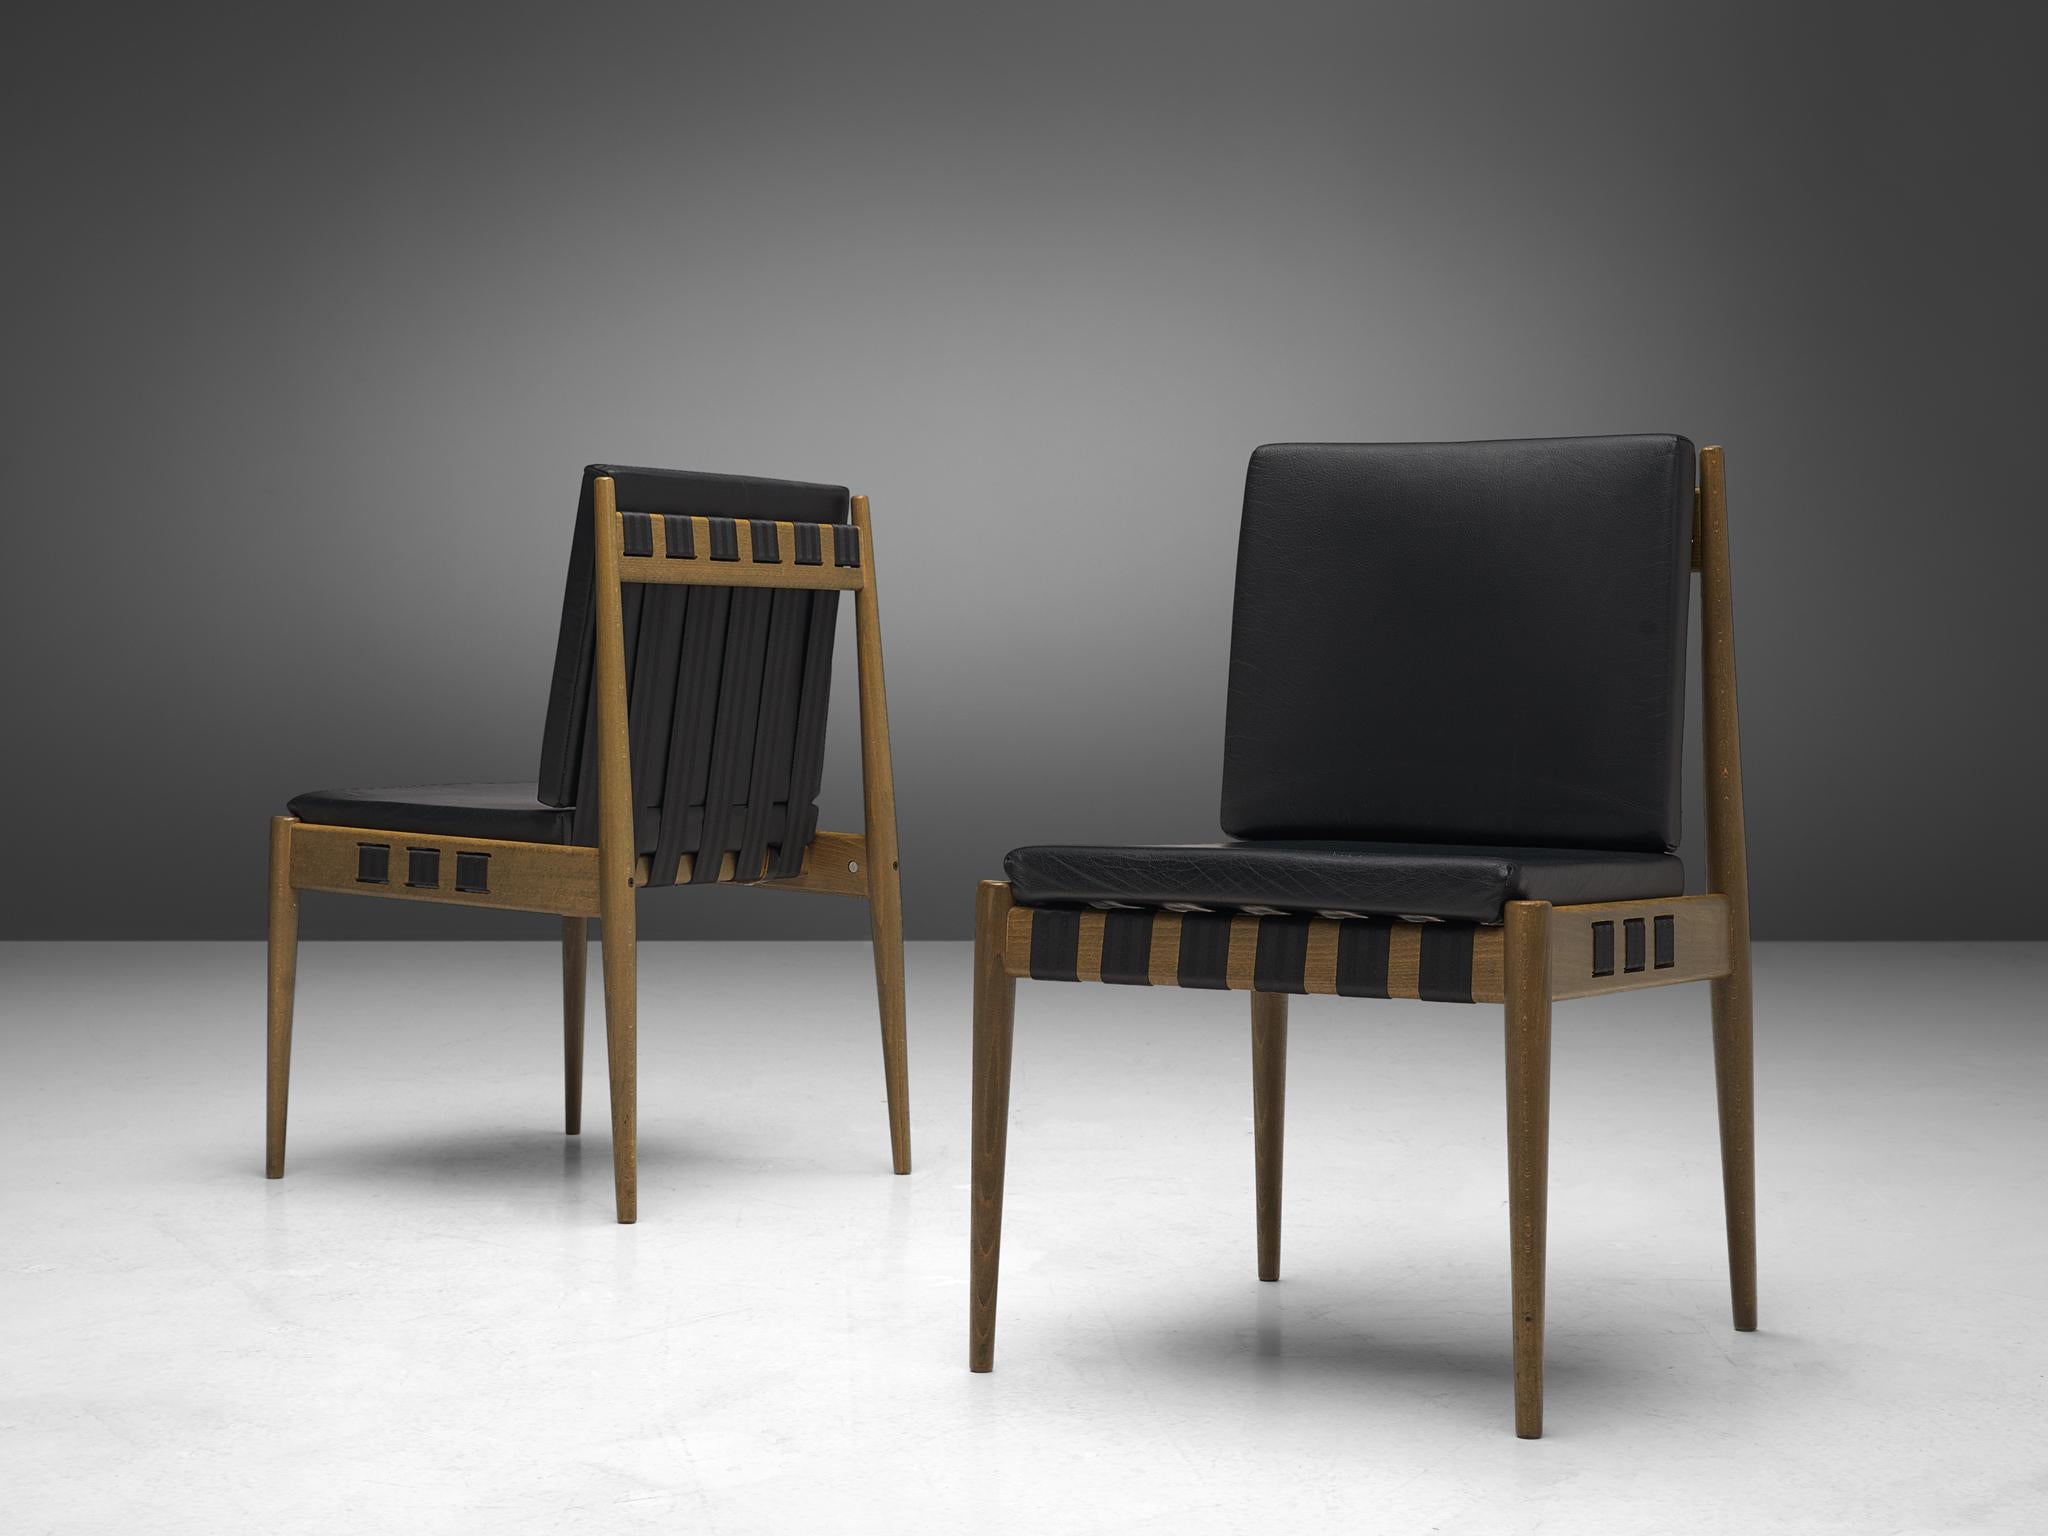 Egon Eiermann, pair of dining chairs model SE121, beech, canvas, leatherette, Germany, design 1961

The versatile chair SE121 was originally designed for the interior of the Kaiser-Wilhelm-Gedächtniskirche in Berlin, of which Egon Eiermann build